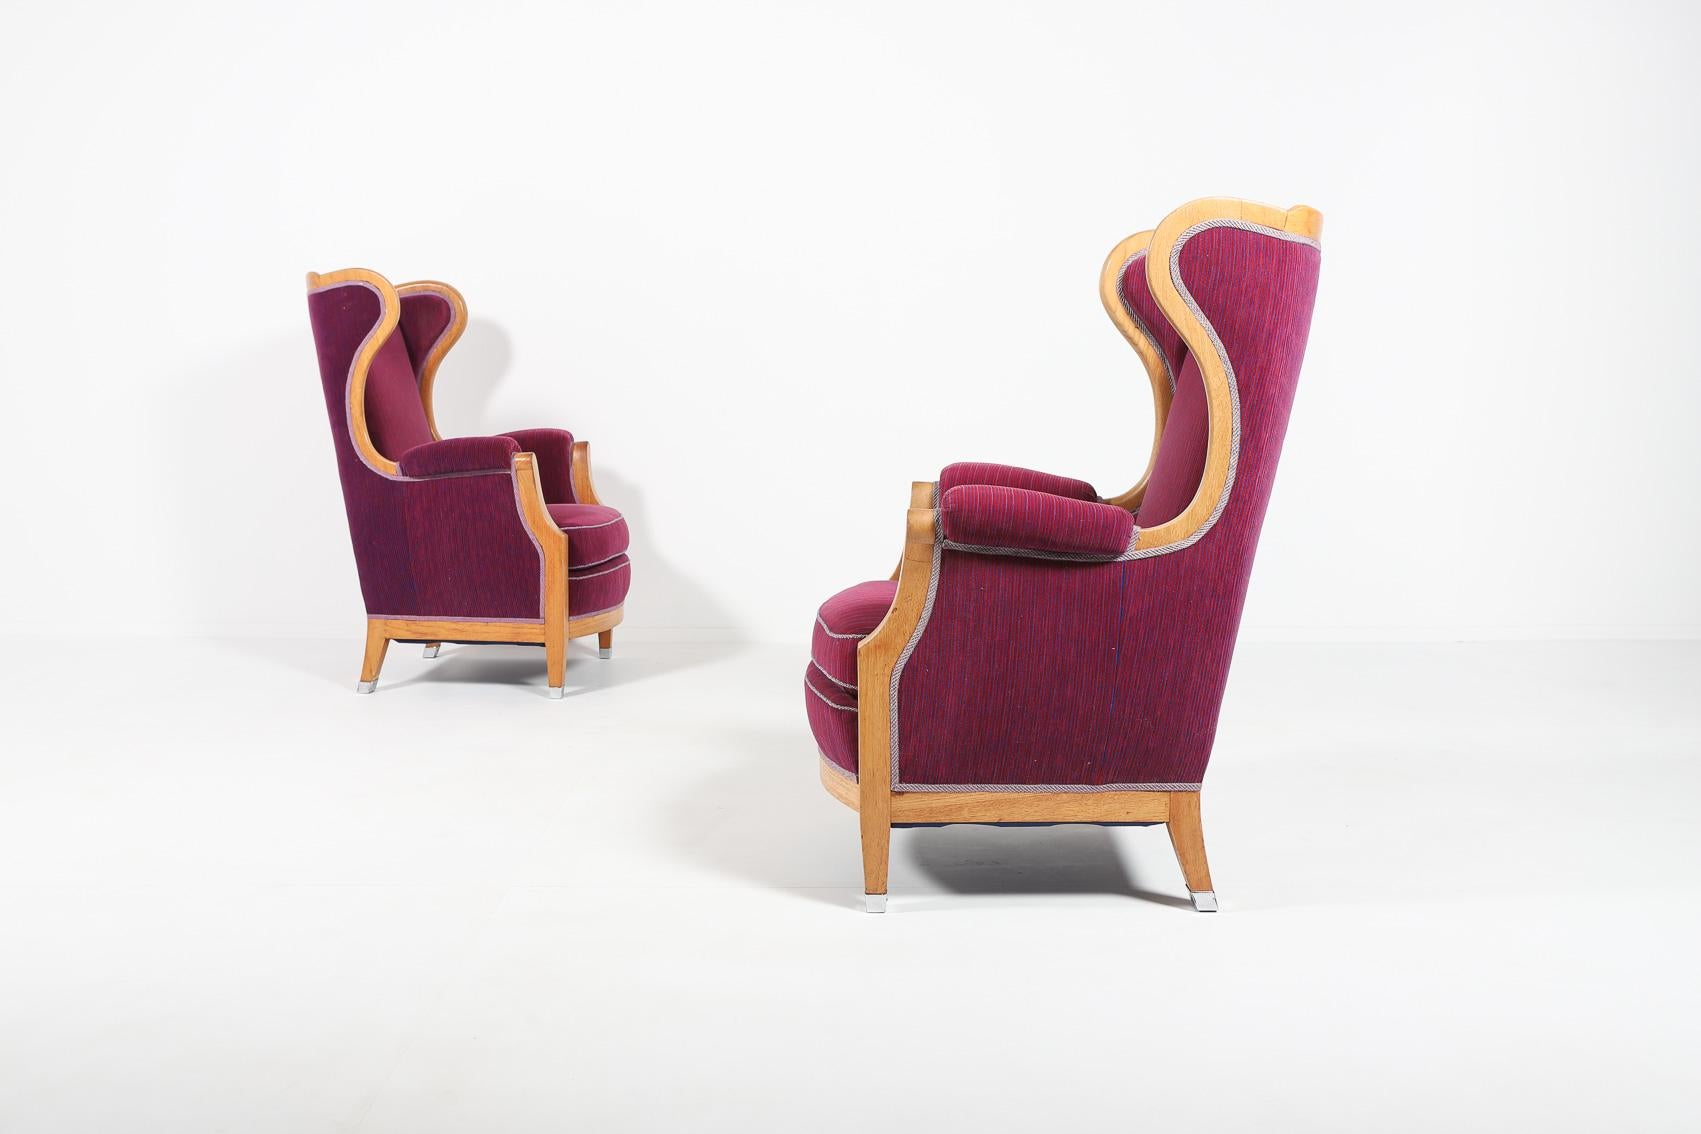 Scandinavian Modern Pair of Lounge Chairs by Oscar Nilsson, Sweden 1960’s For Sale